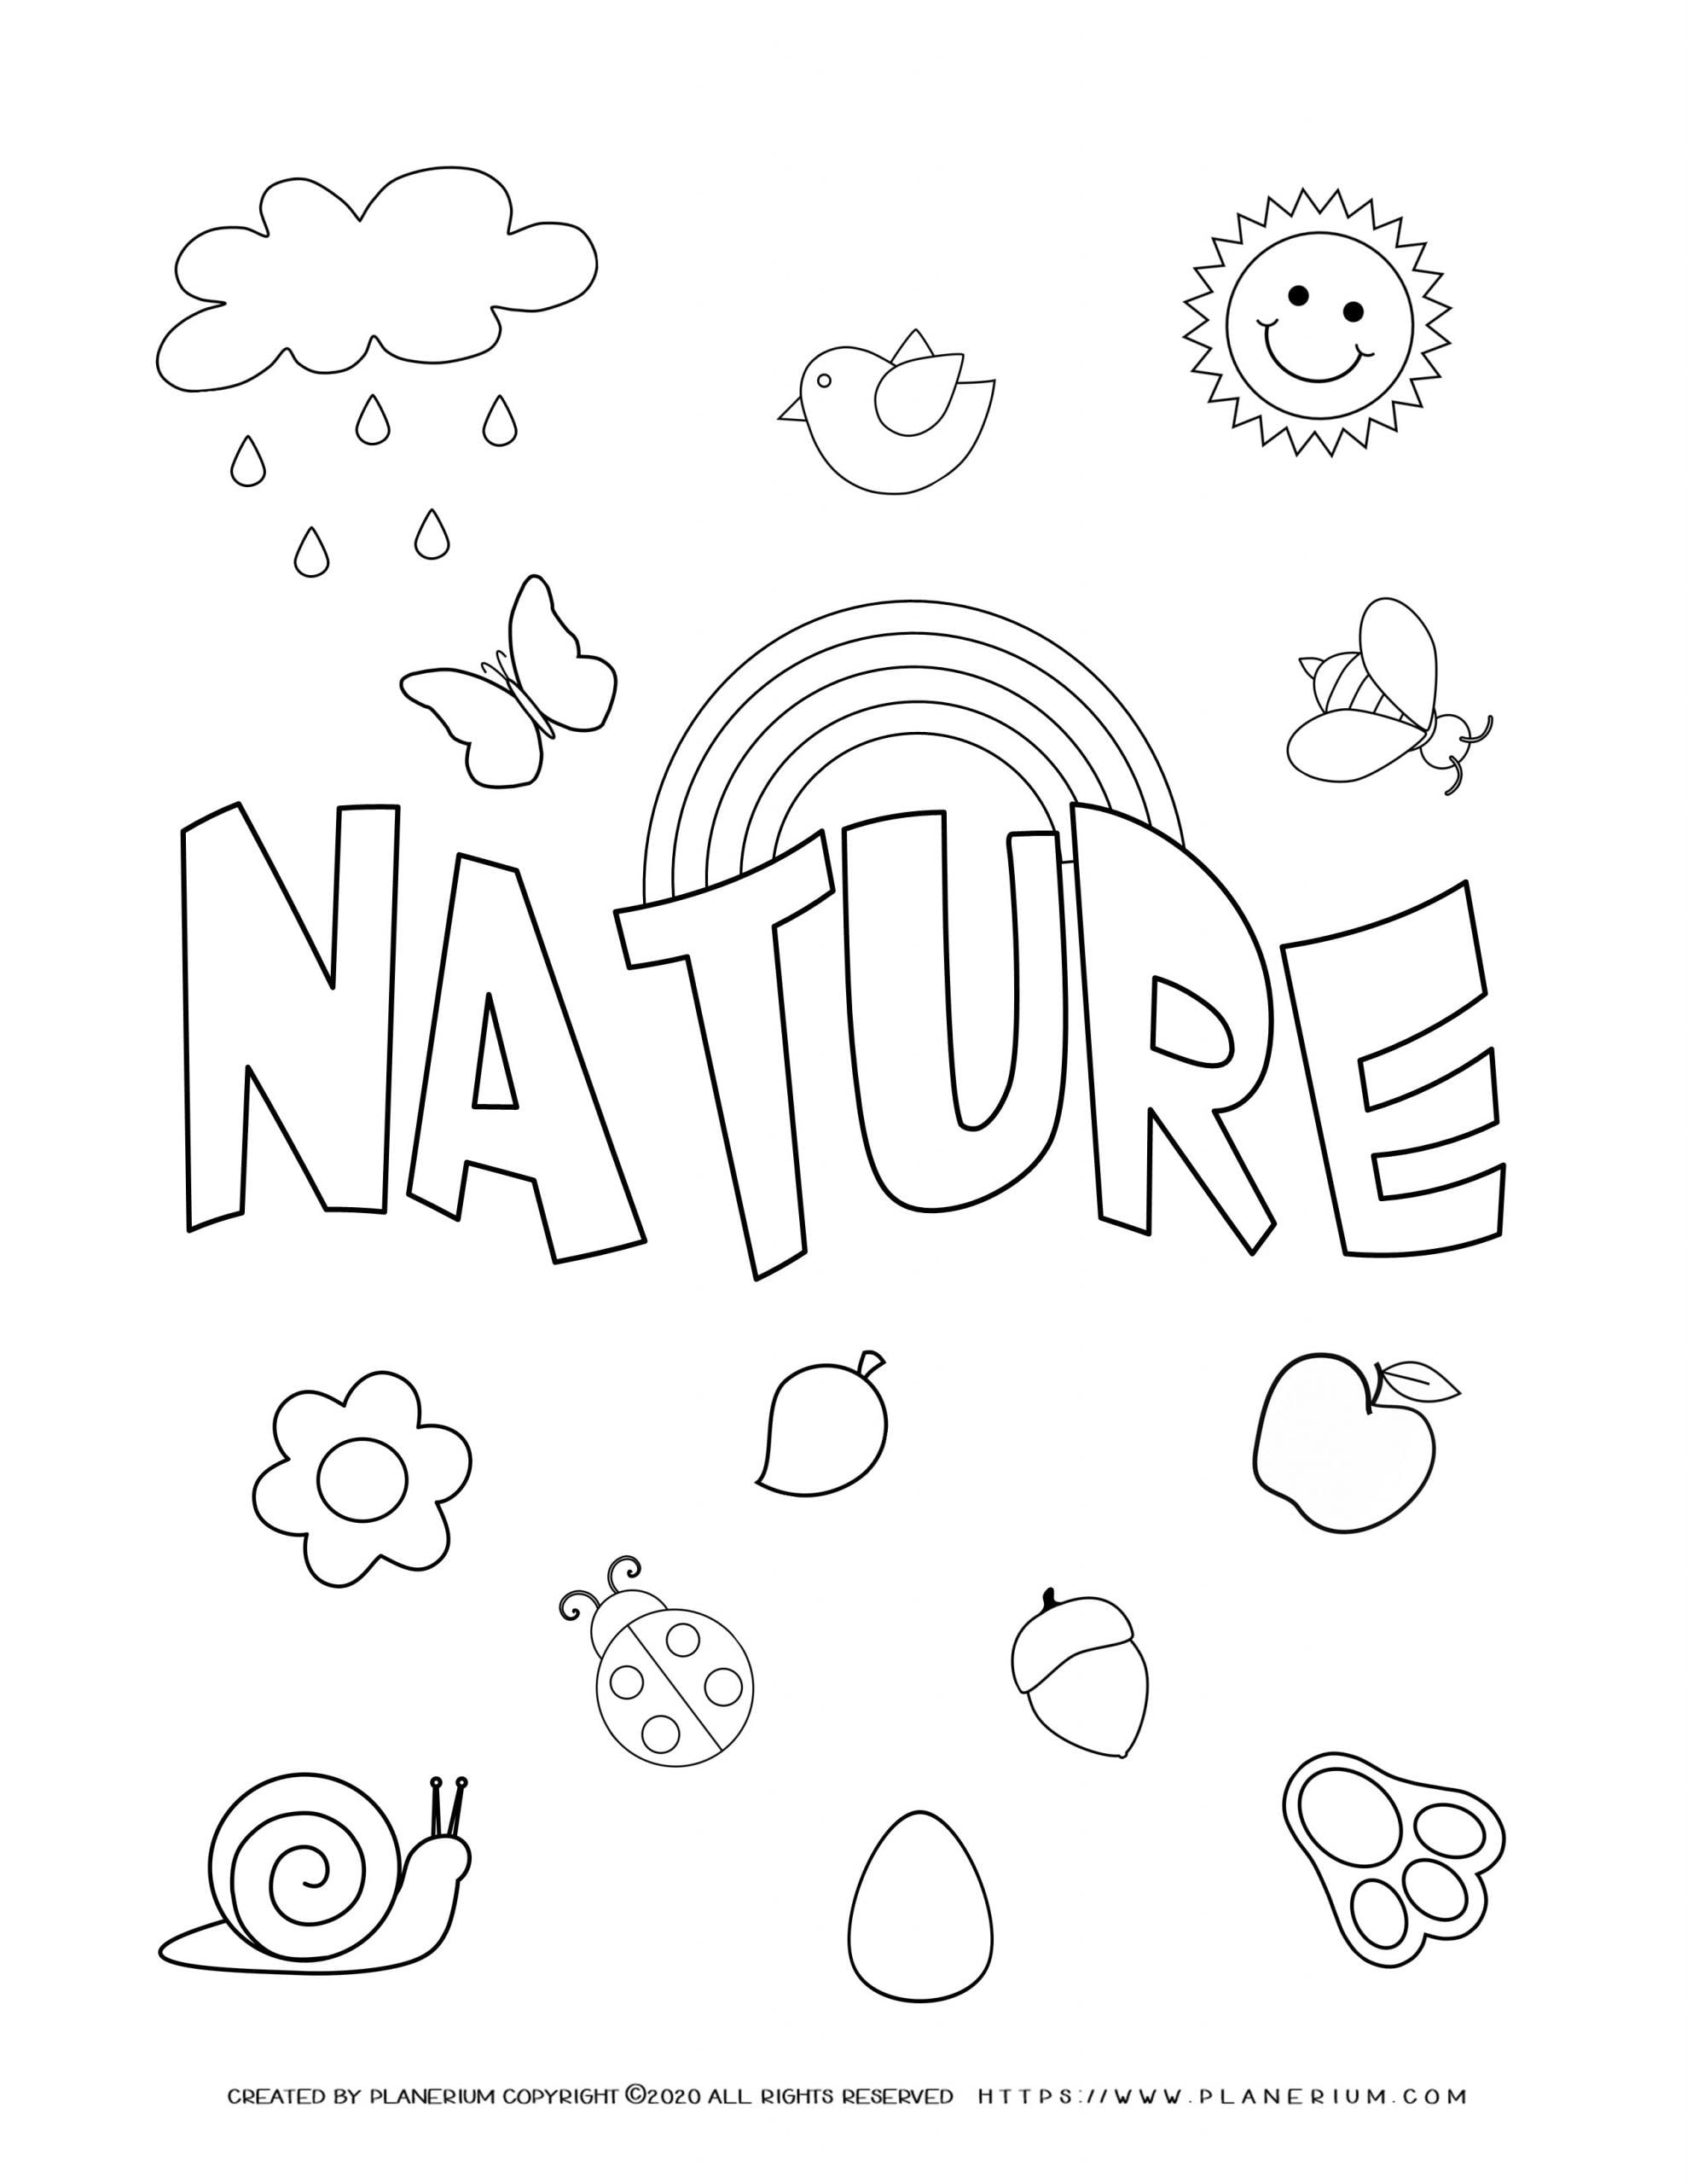 Earth day - Coloring page - Nature poster